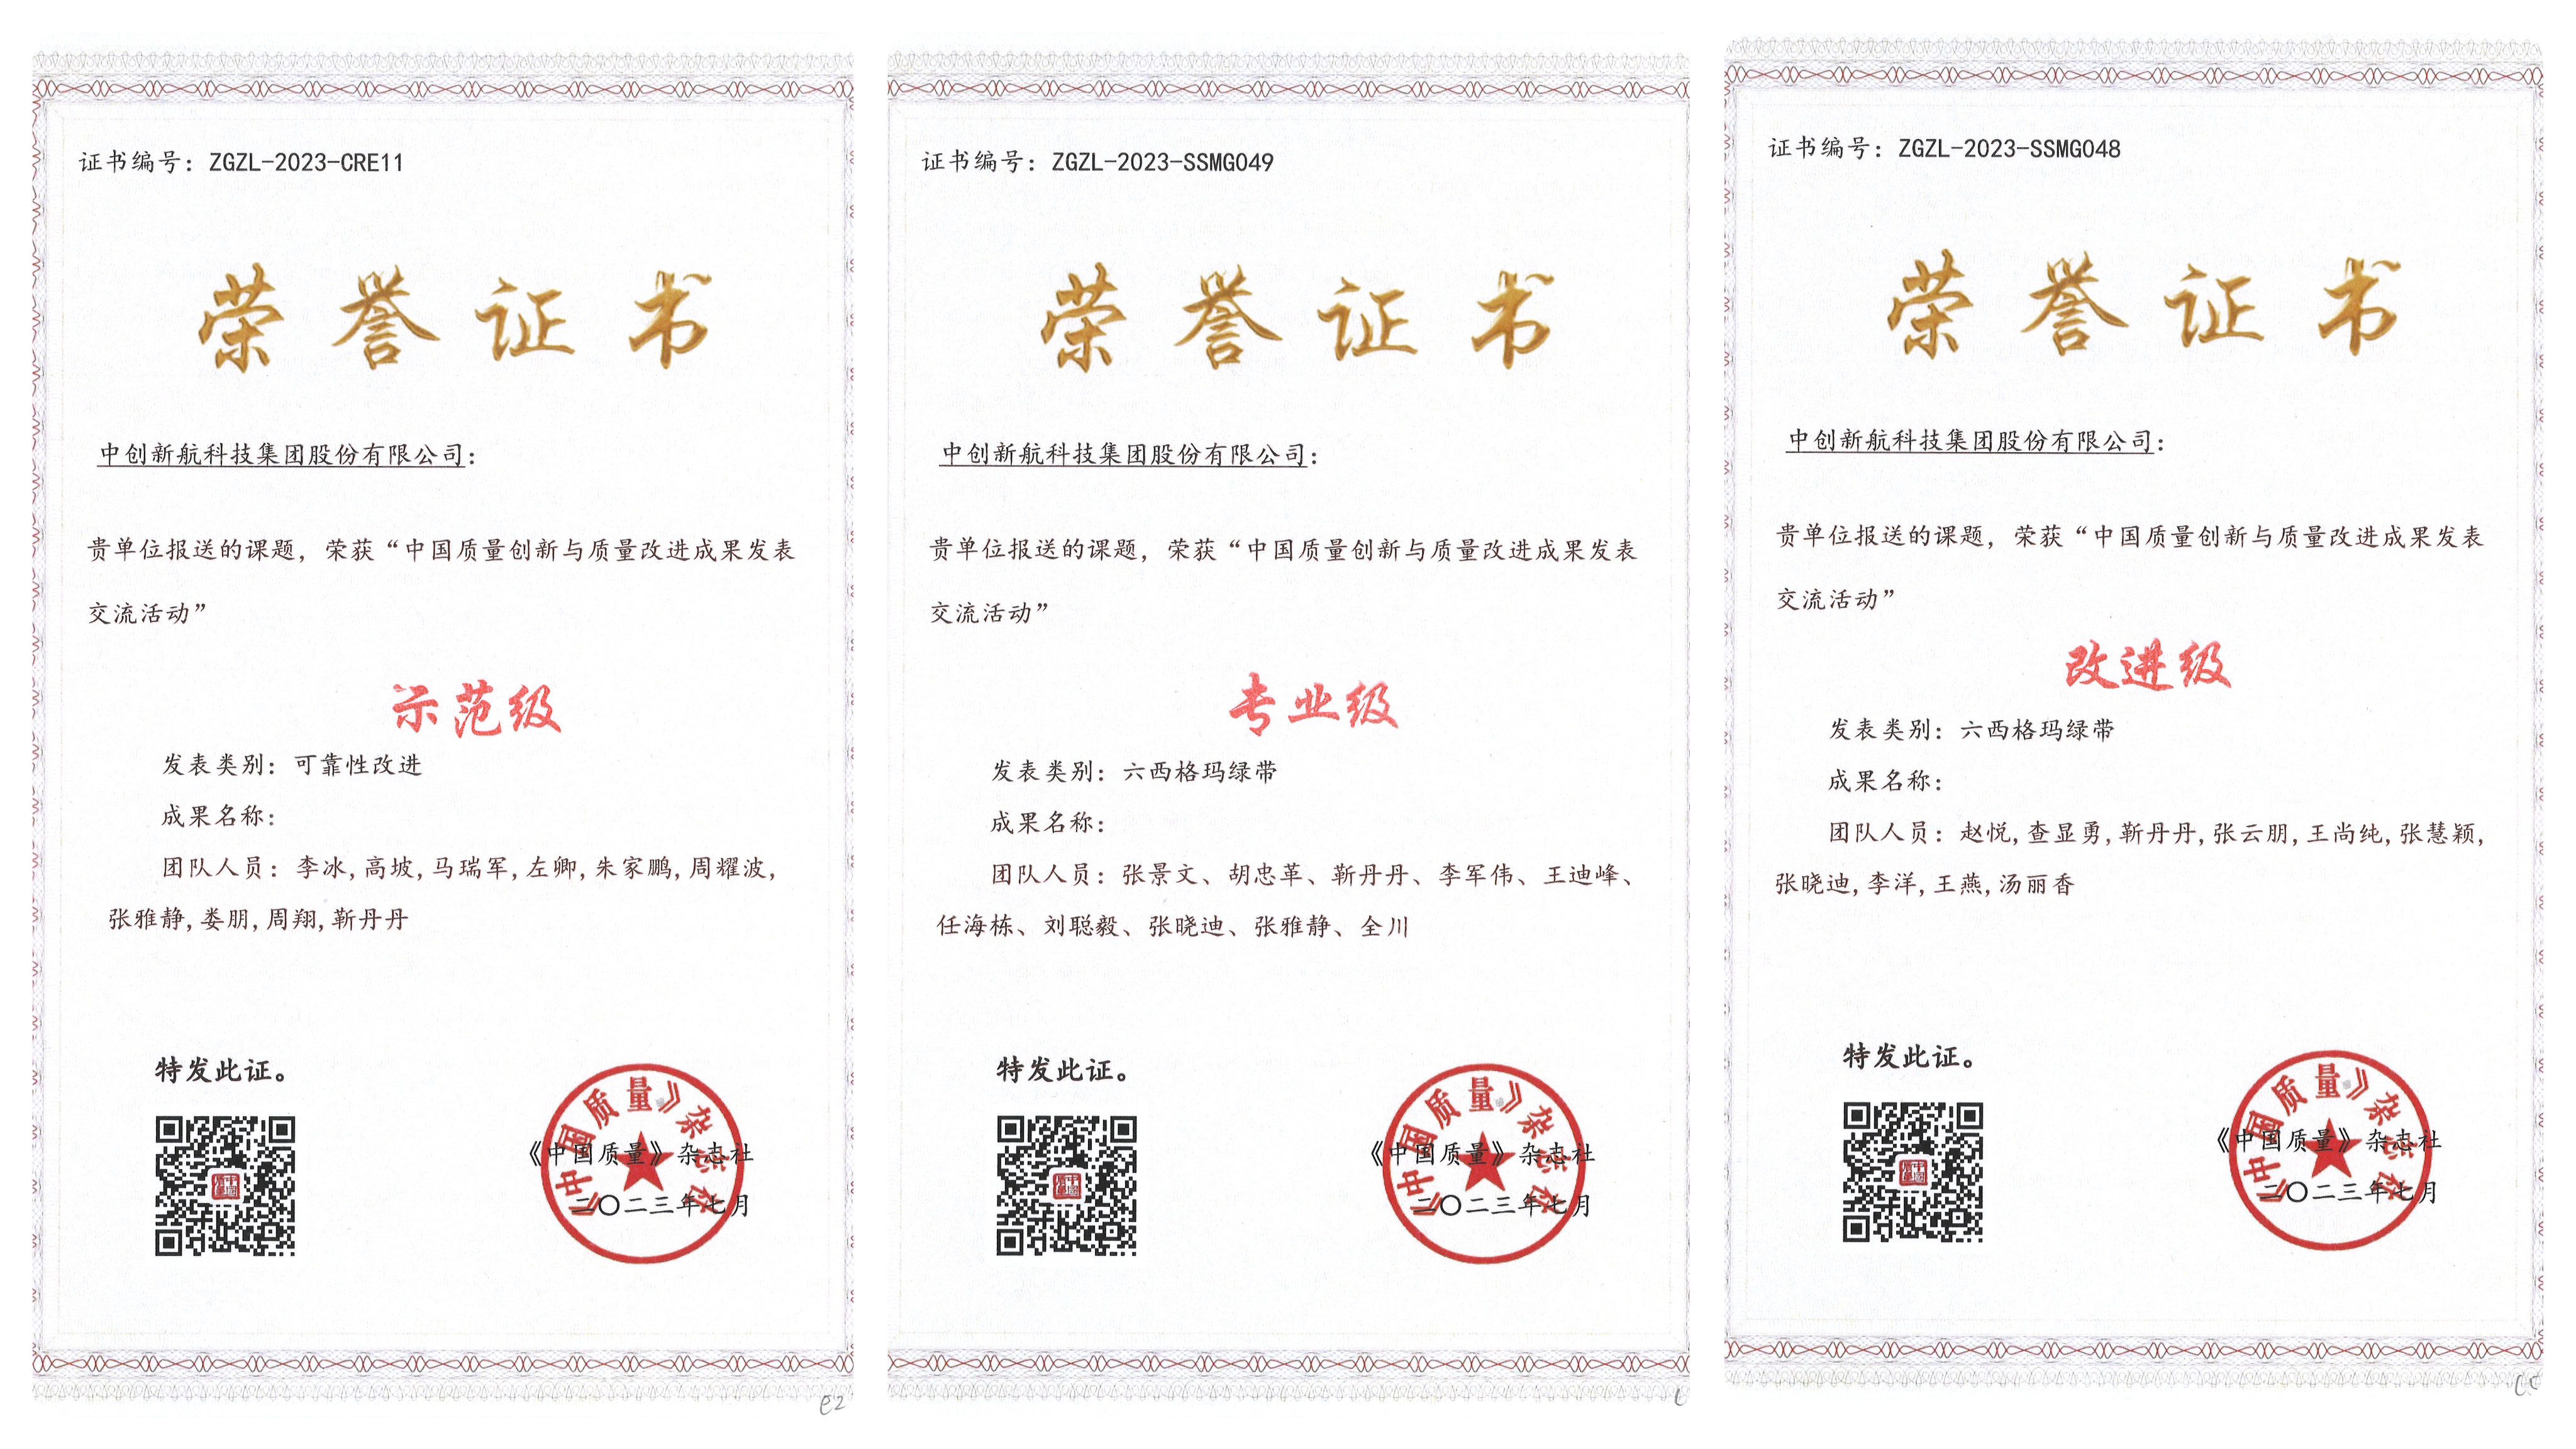 CALB Received the Highest Award from the China Quality Association